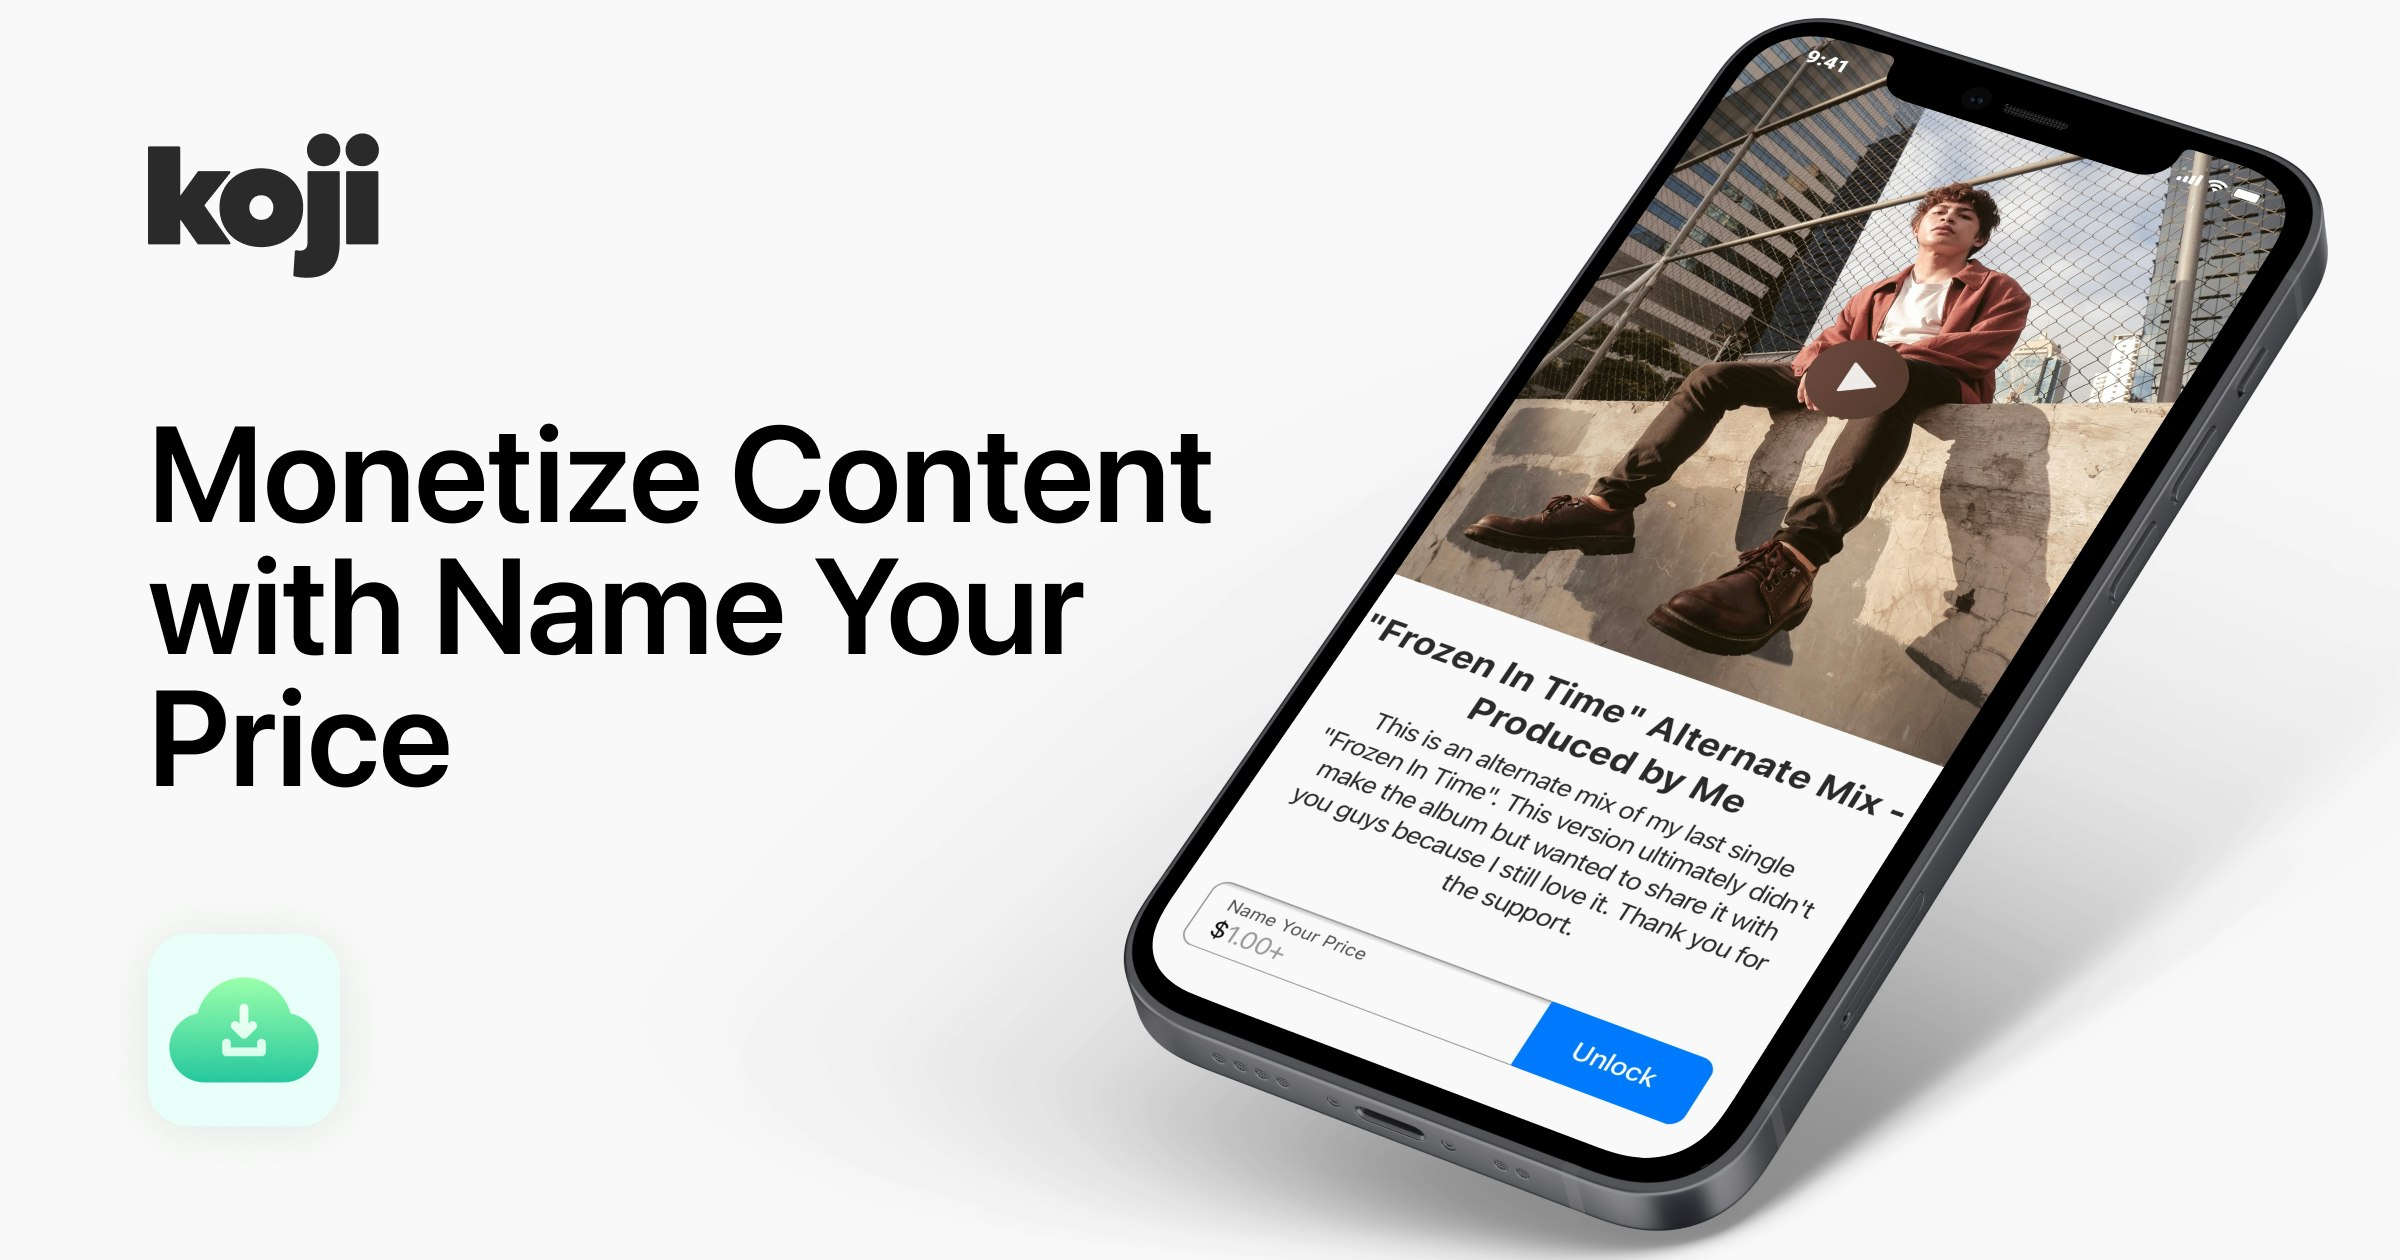 How to Monetize Content with Name Your Price